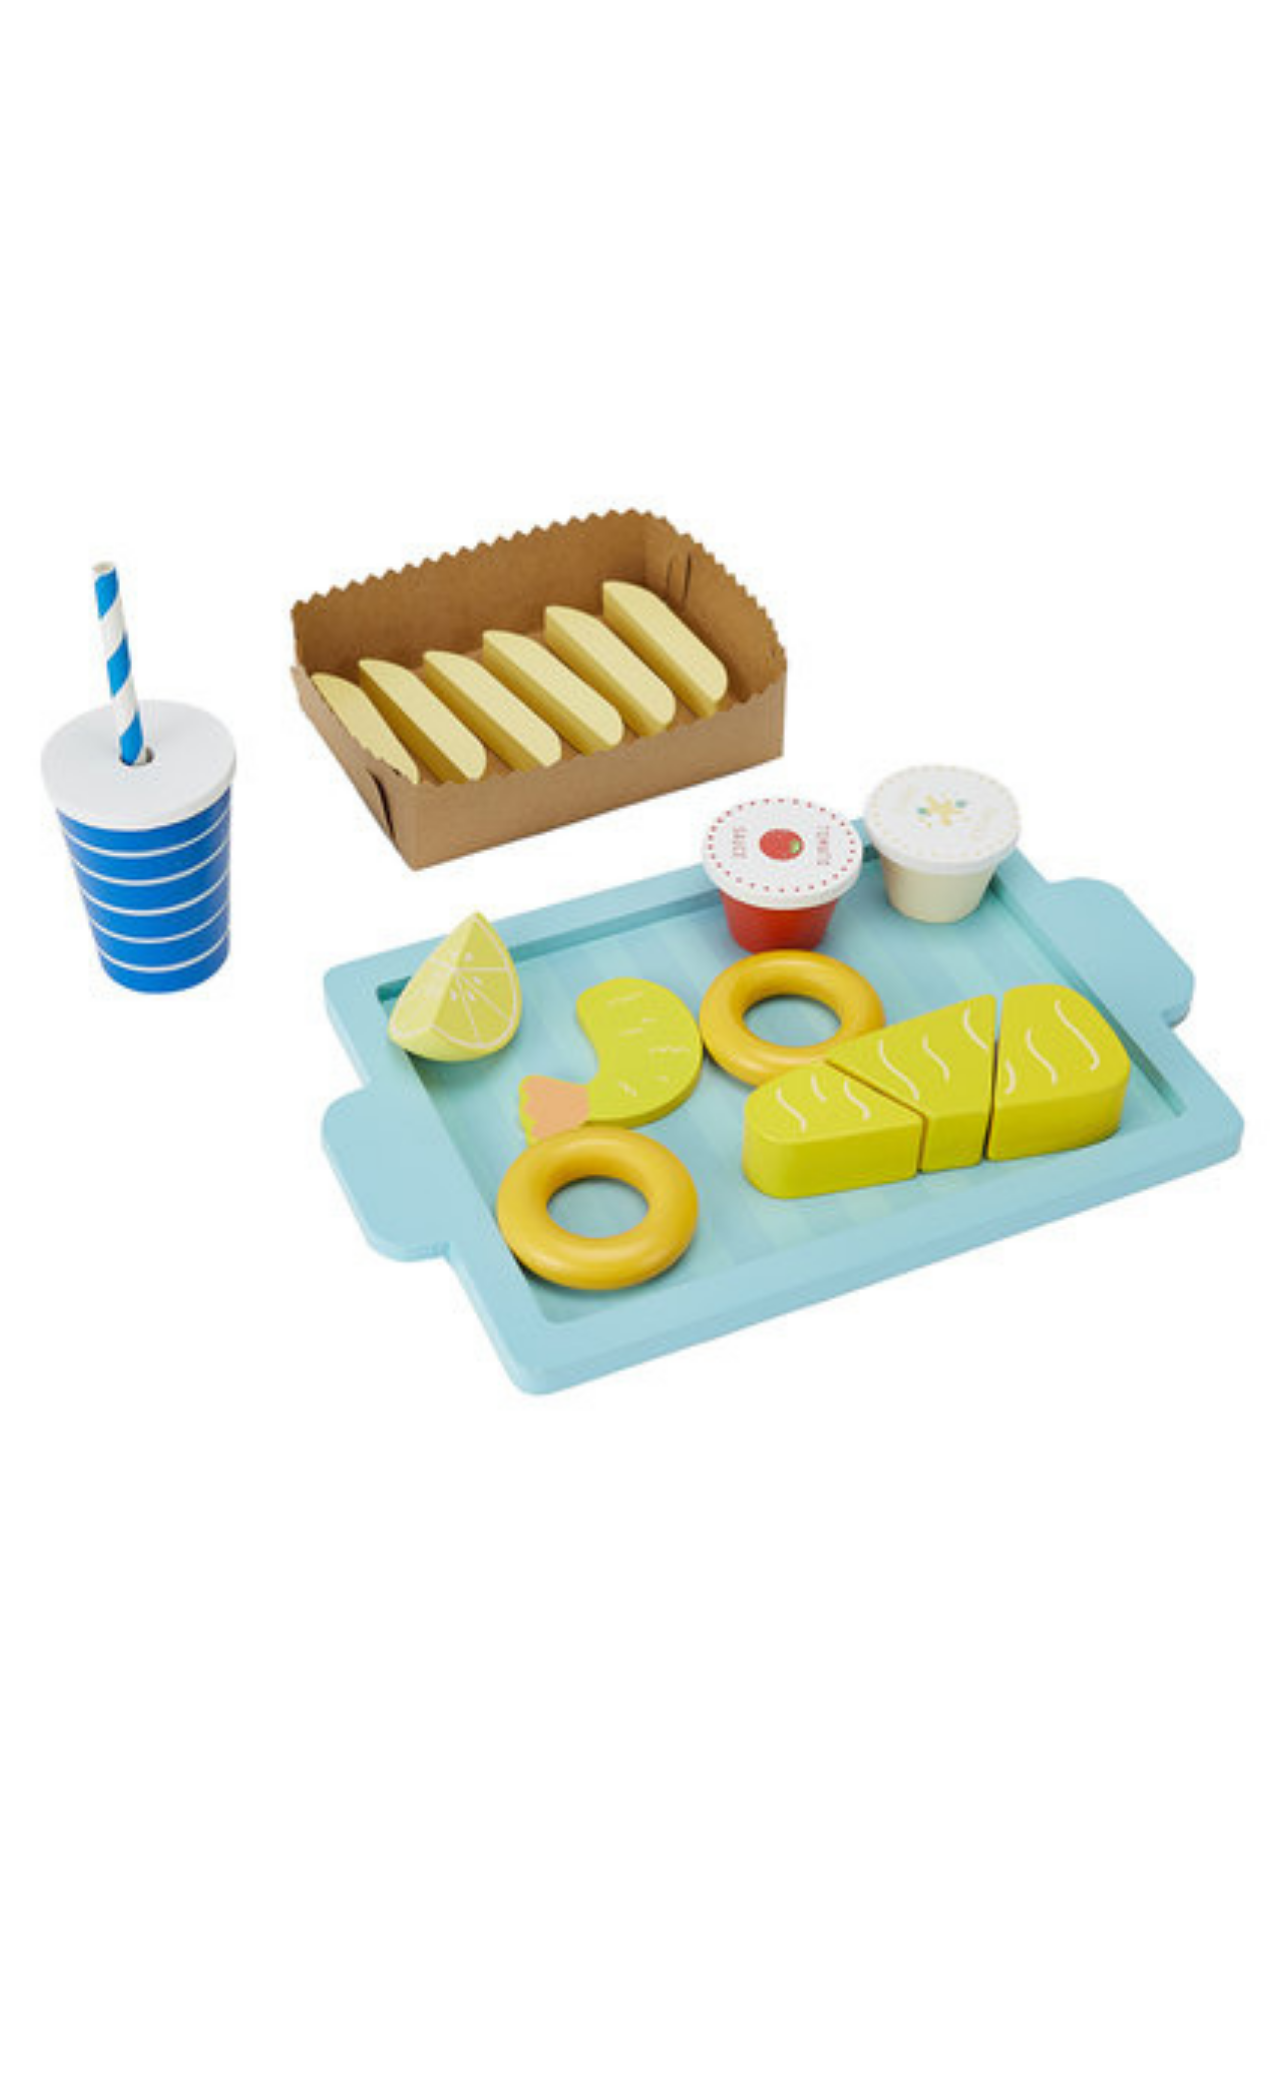 *NEW Wooden Fish and Chips set